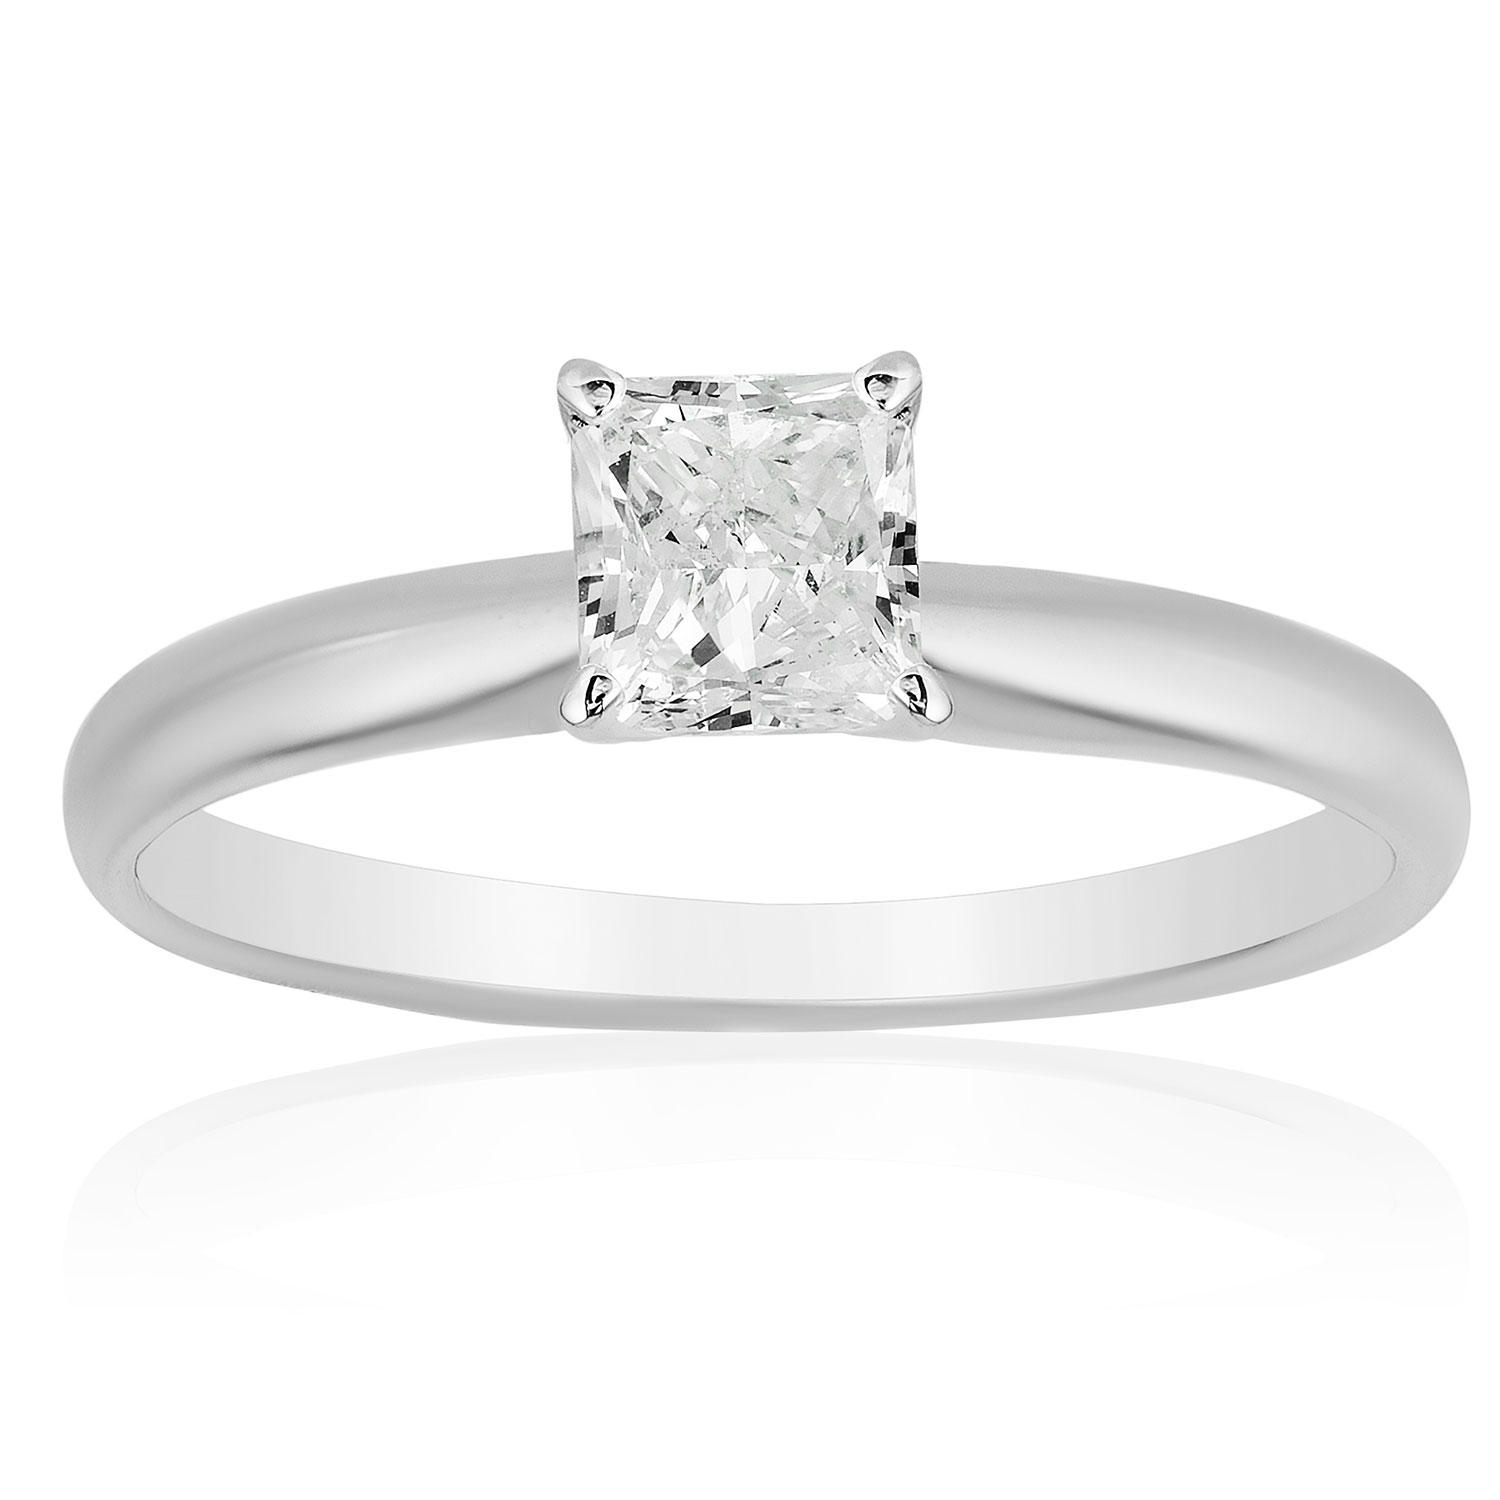 Superior Quality VS Collection 1 CT. T.W. Princess Cut Diamond Solitaire Ring in 18K White Gold (6.5) with the De Beers